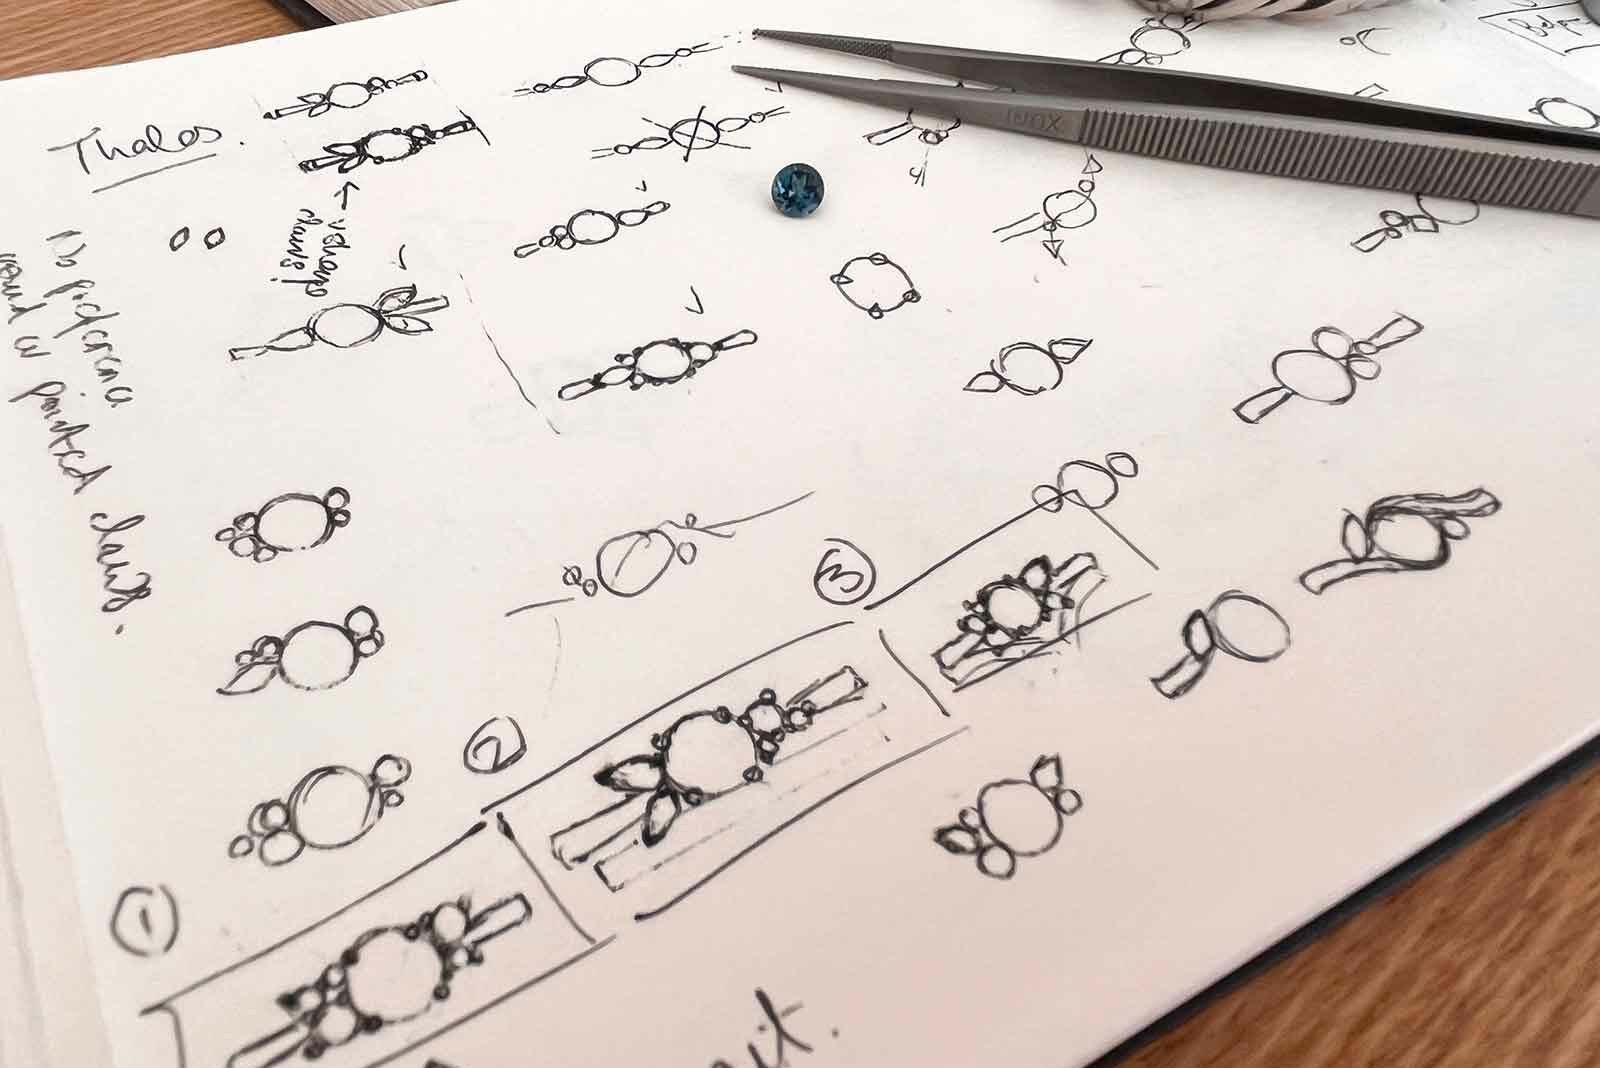 Designing a custom engagement ring - work in progress sketches